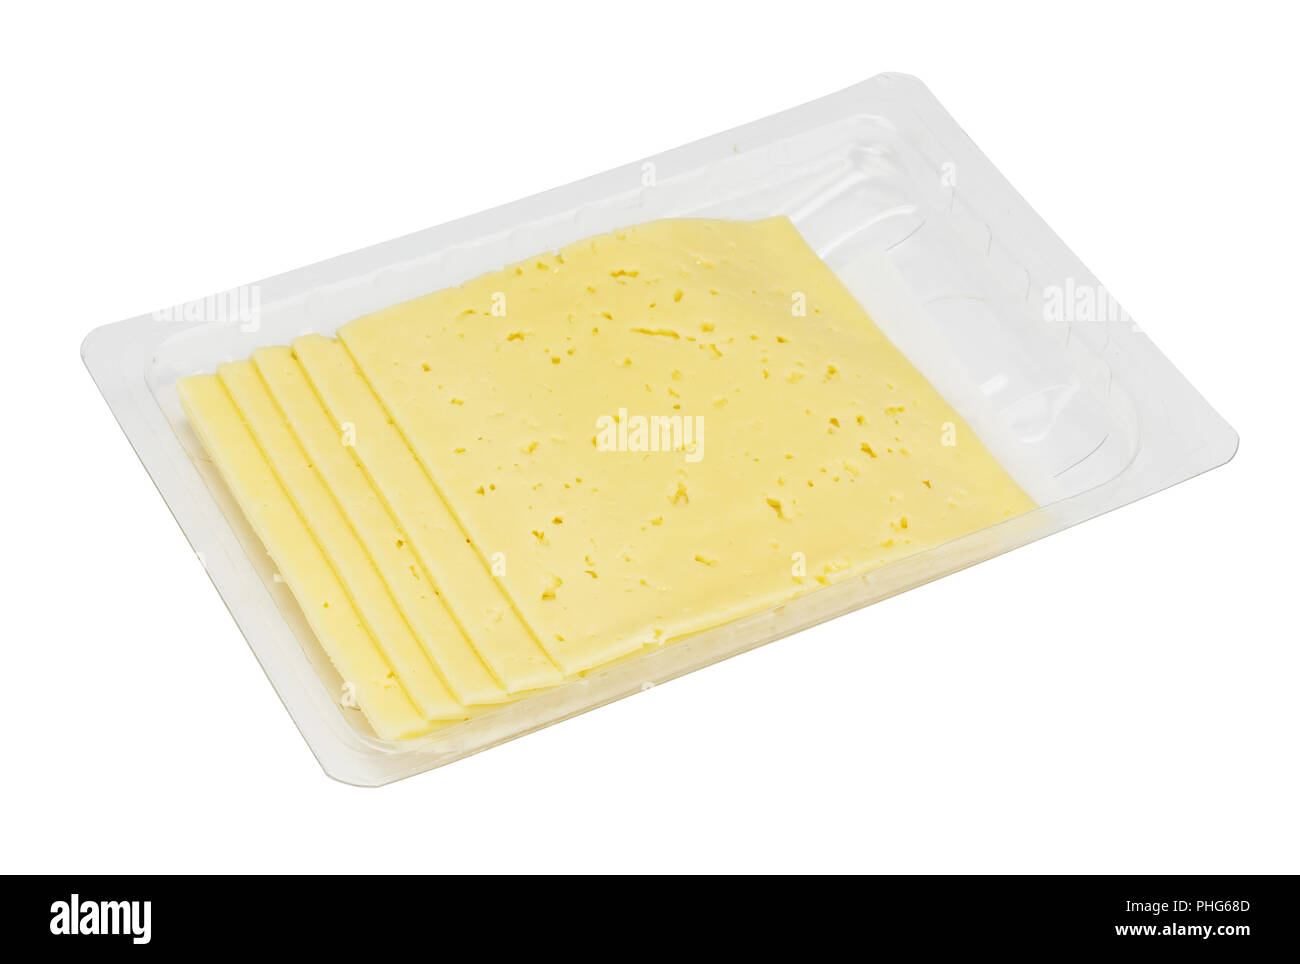 Hundred fifty grams of  cheese Stock Photo